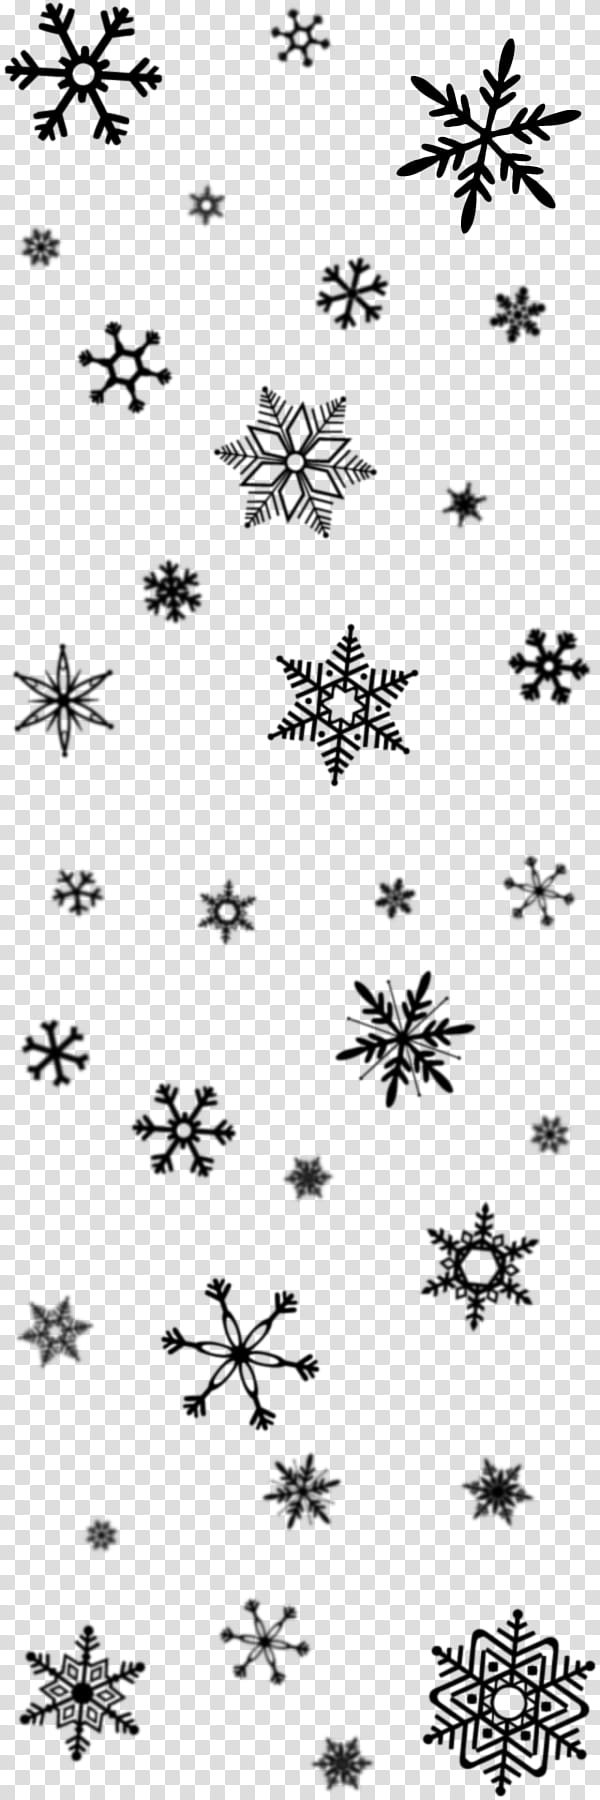 Snowflake, Black White M, Line, Point, Angle, Tree, Sky, Blackandwhite transparent background PNG clipart